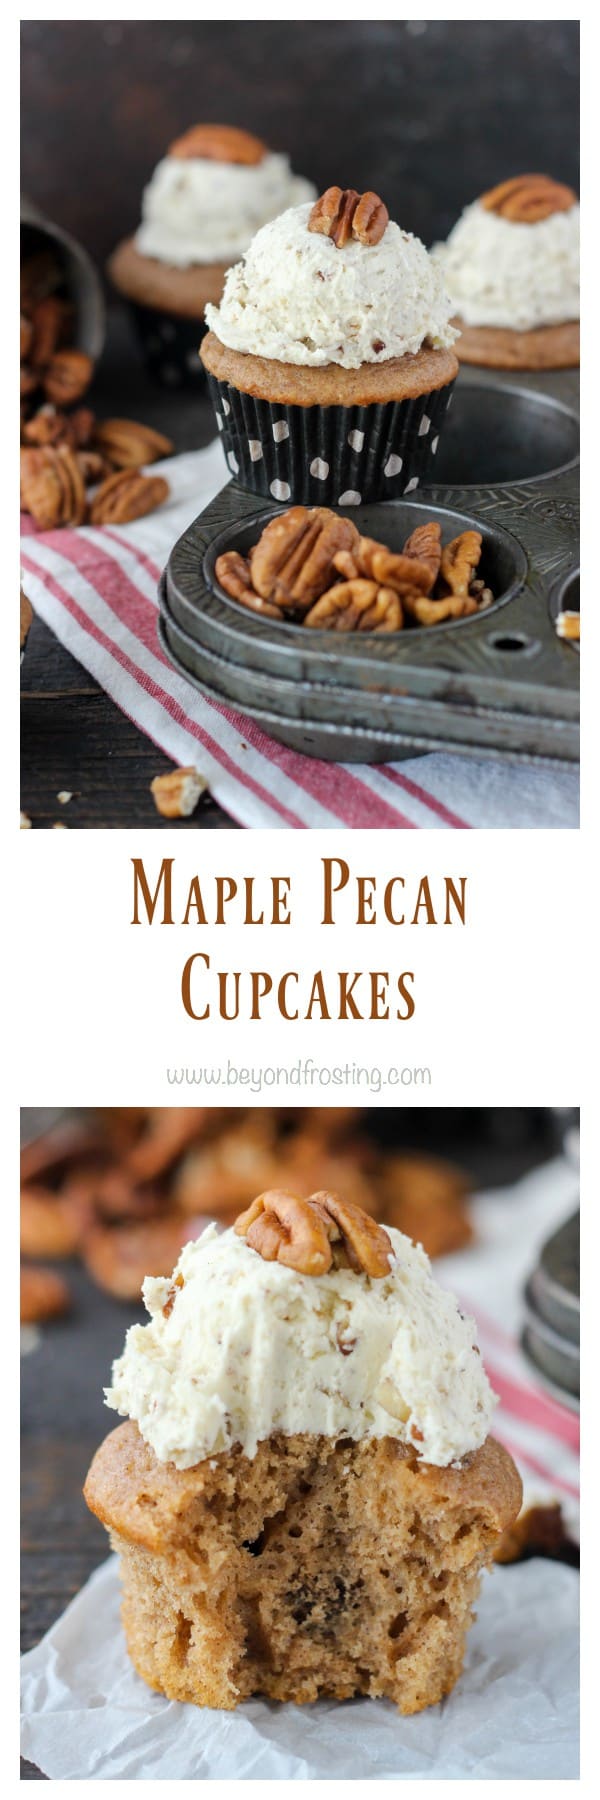 A collage of two images of maple pecan cupcakes with brown butter pecan frosting on top